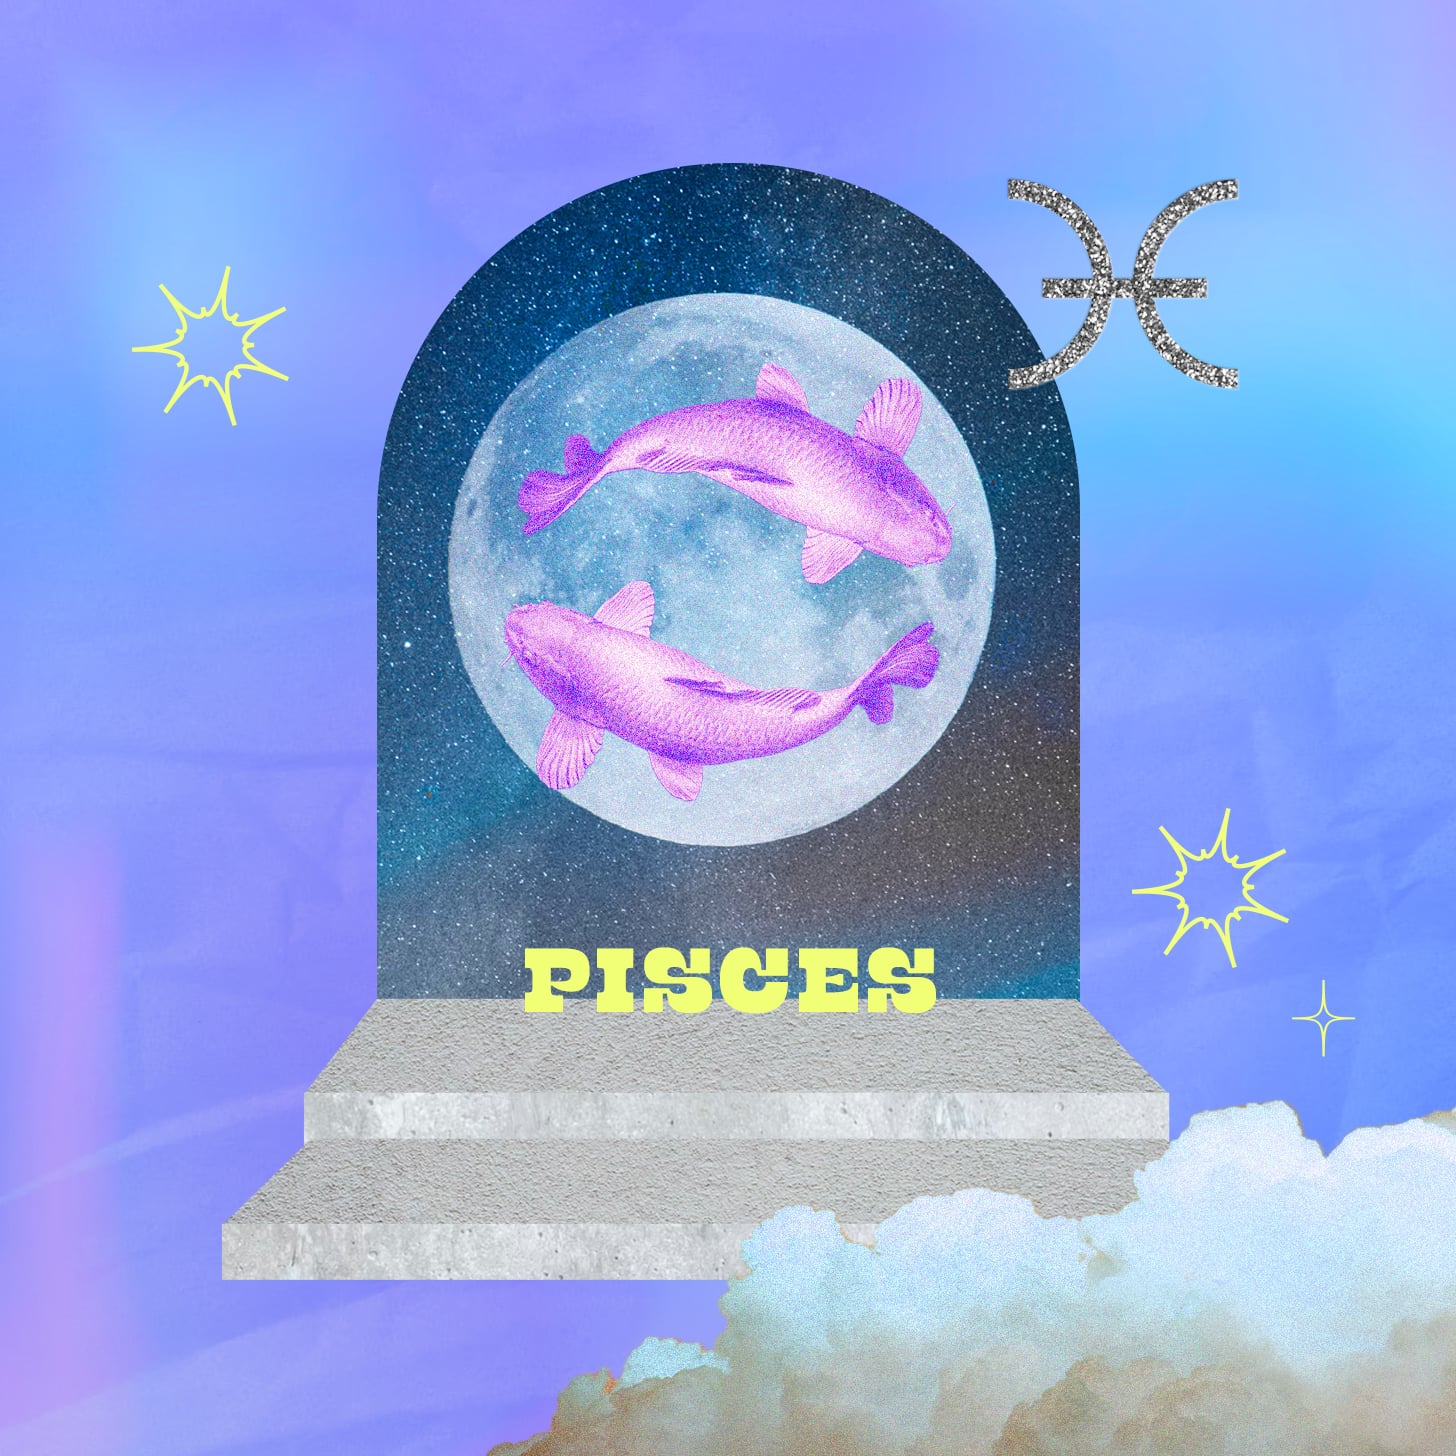 Pisces weekly horoscope for August 21, 2022